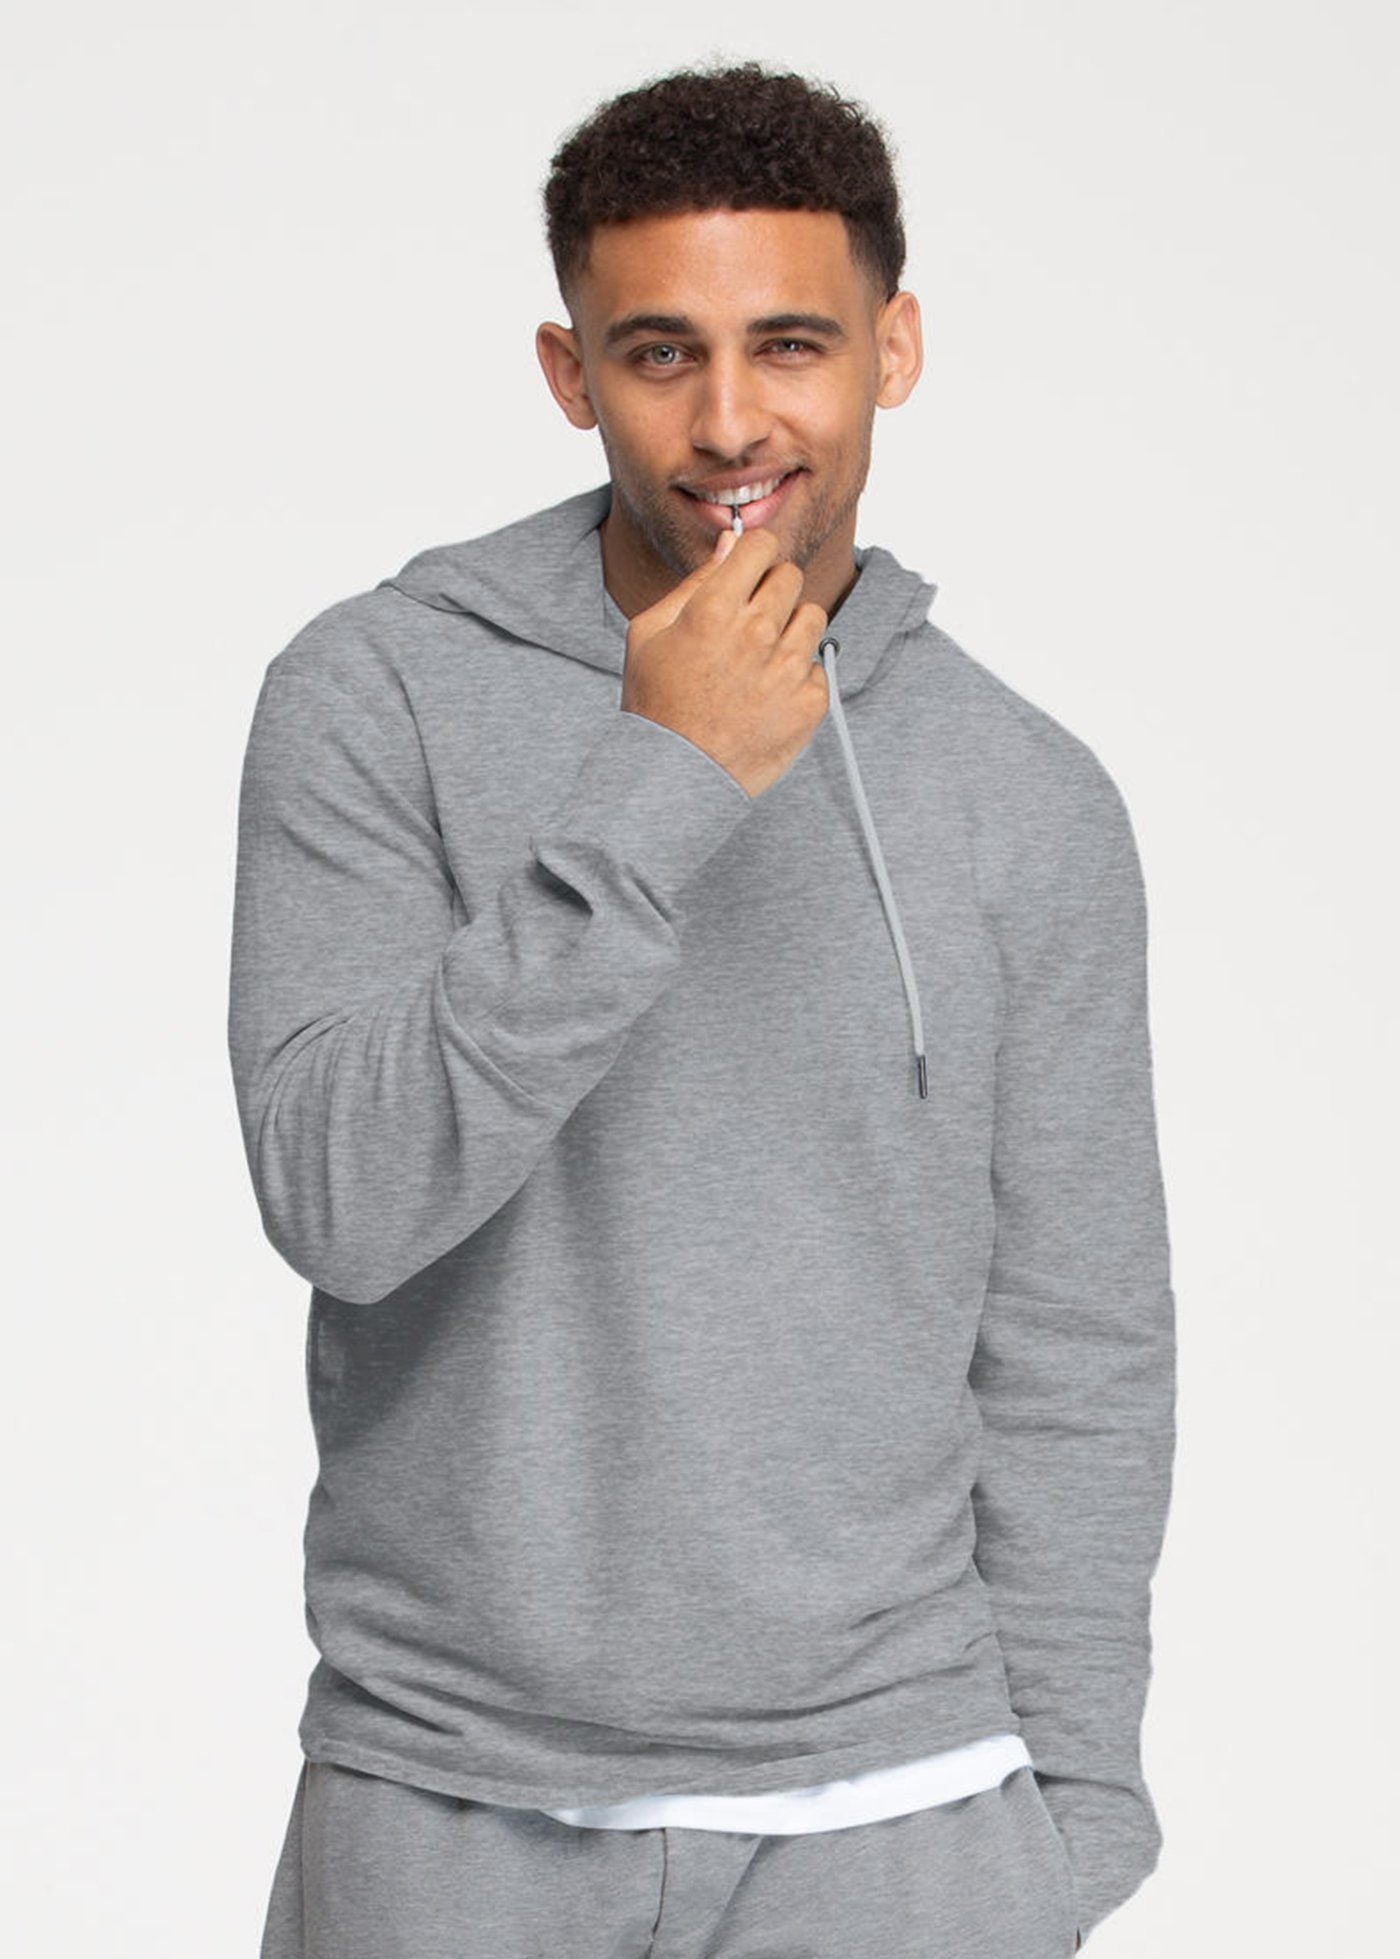 The Conquer Hoodie - Athletic Heather Grey  Hoodies, 4 way stretch fabric,  Heather grey